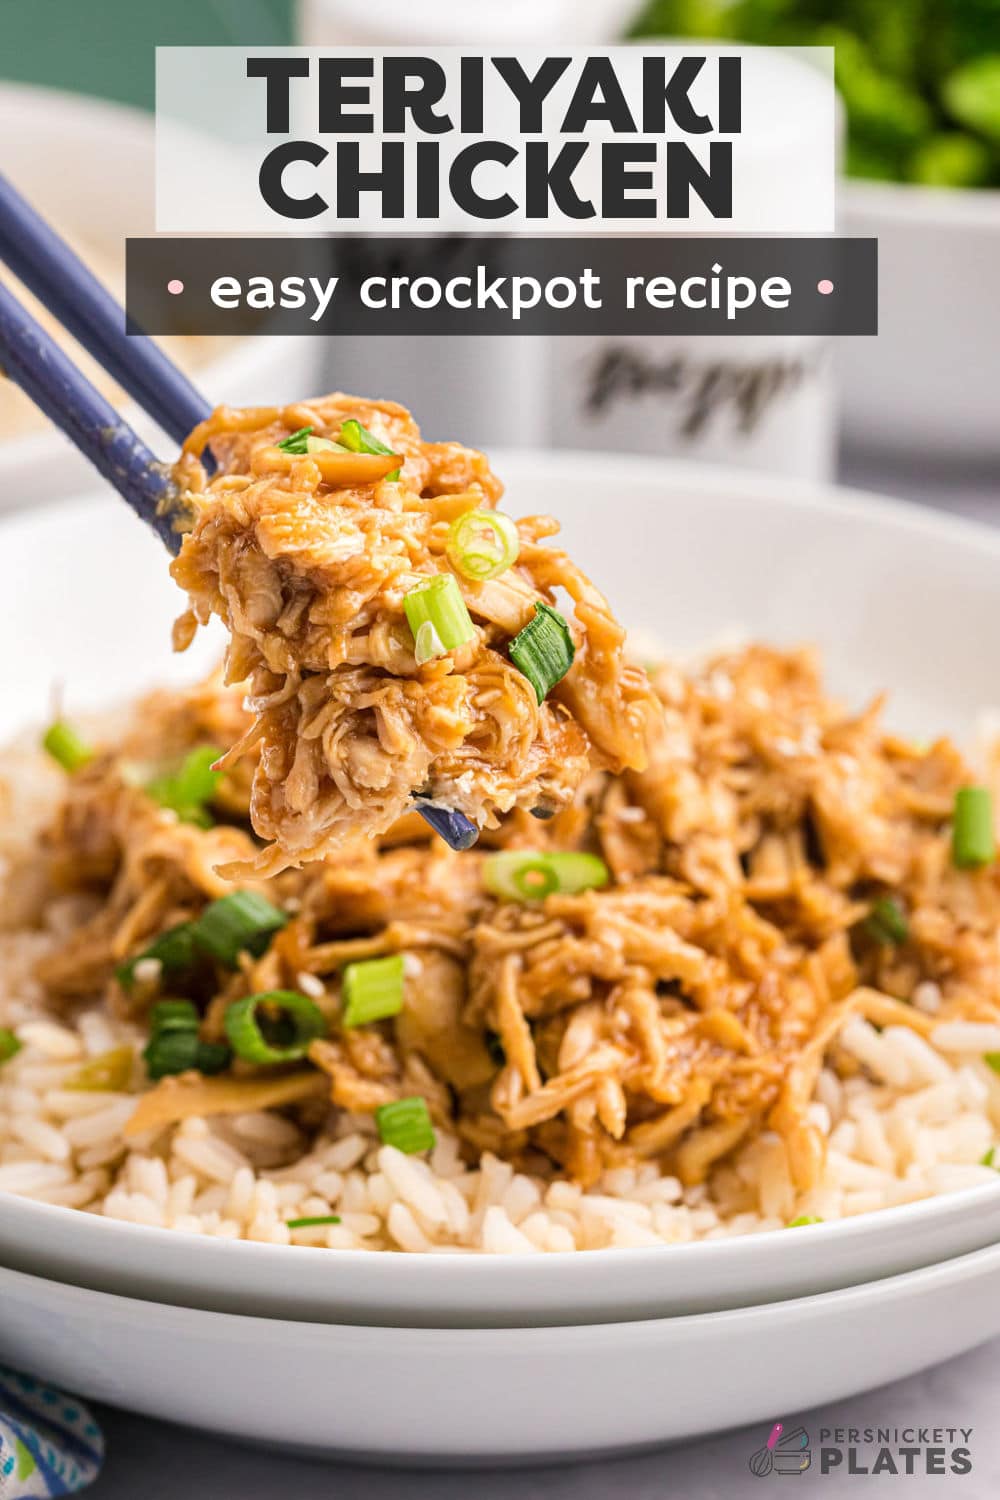 This sweet and savory, slightly sticky, and super saucy slow cooker honey teriyaki chicken is made with simple ingredients and just 10 minutes of prep time. Everything gets dumped and set in the morning and the chicken is pull-apart tender by the time dinner time rolls around, which makes it perfect for busy weeknights and lazy weekends! | www.persnicketyplates.com